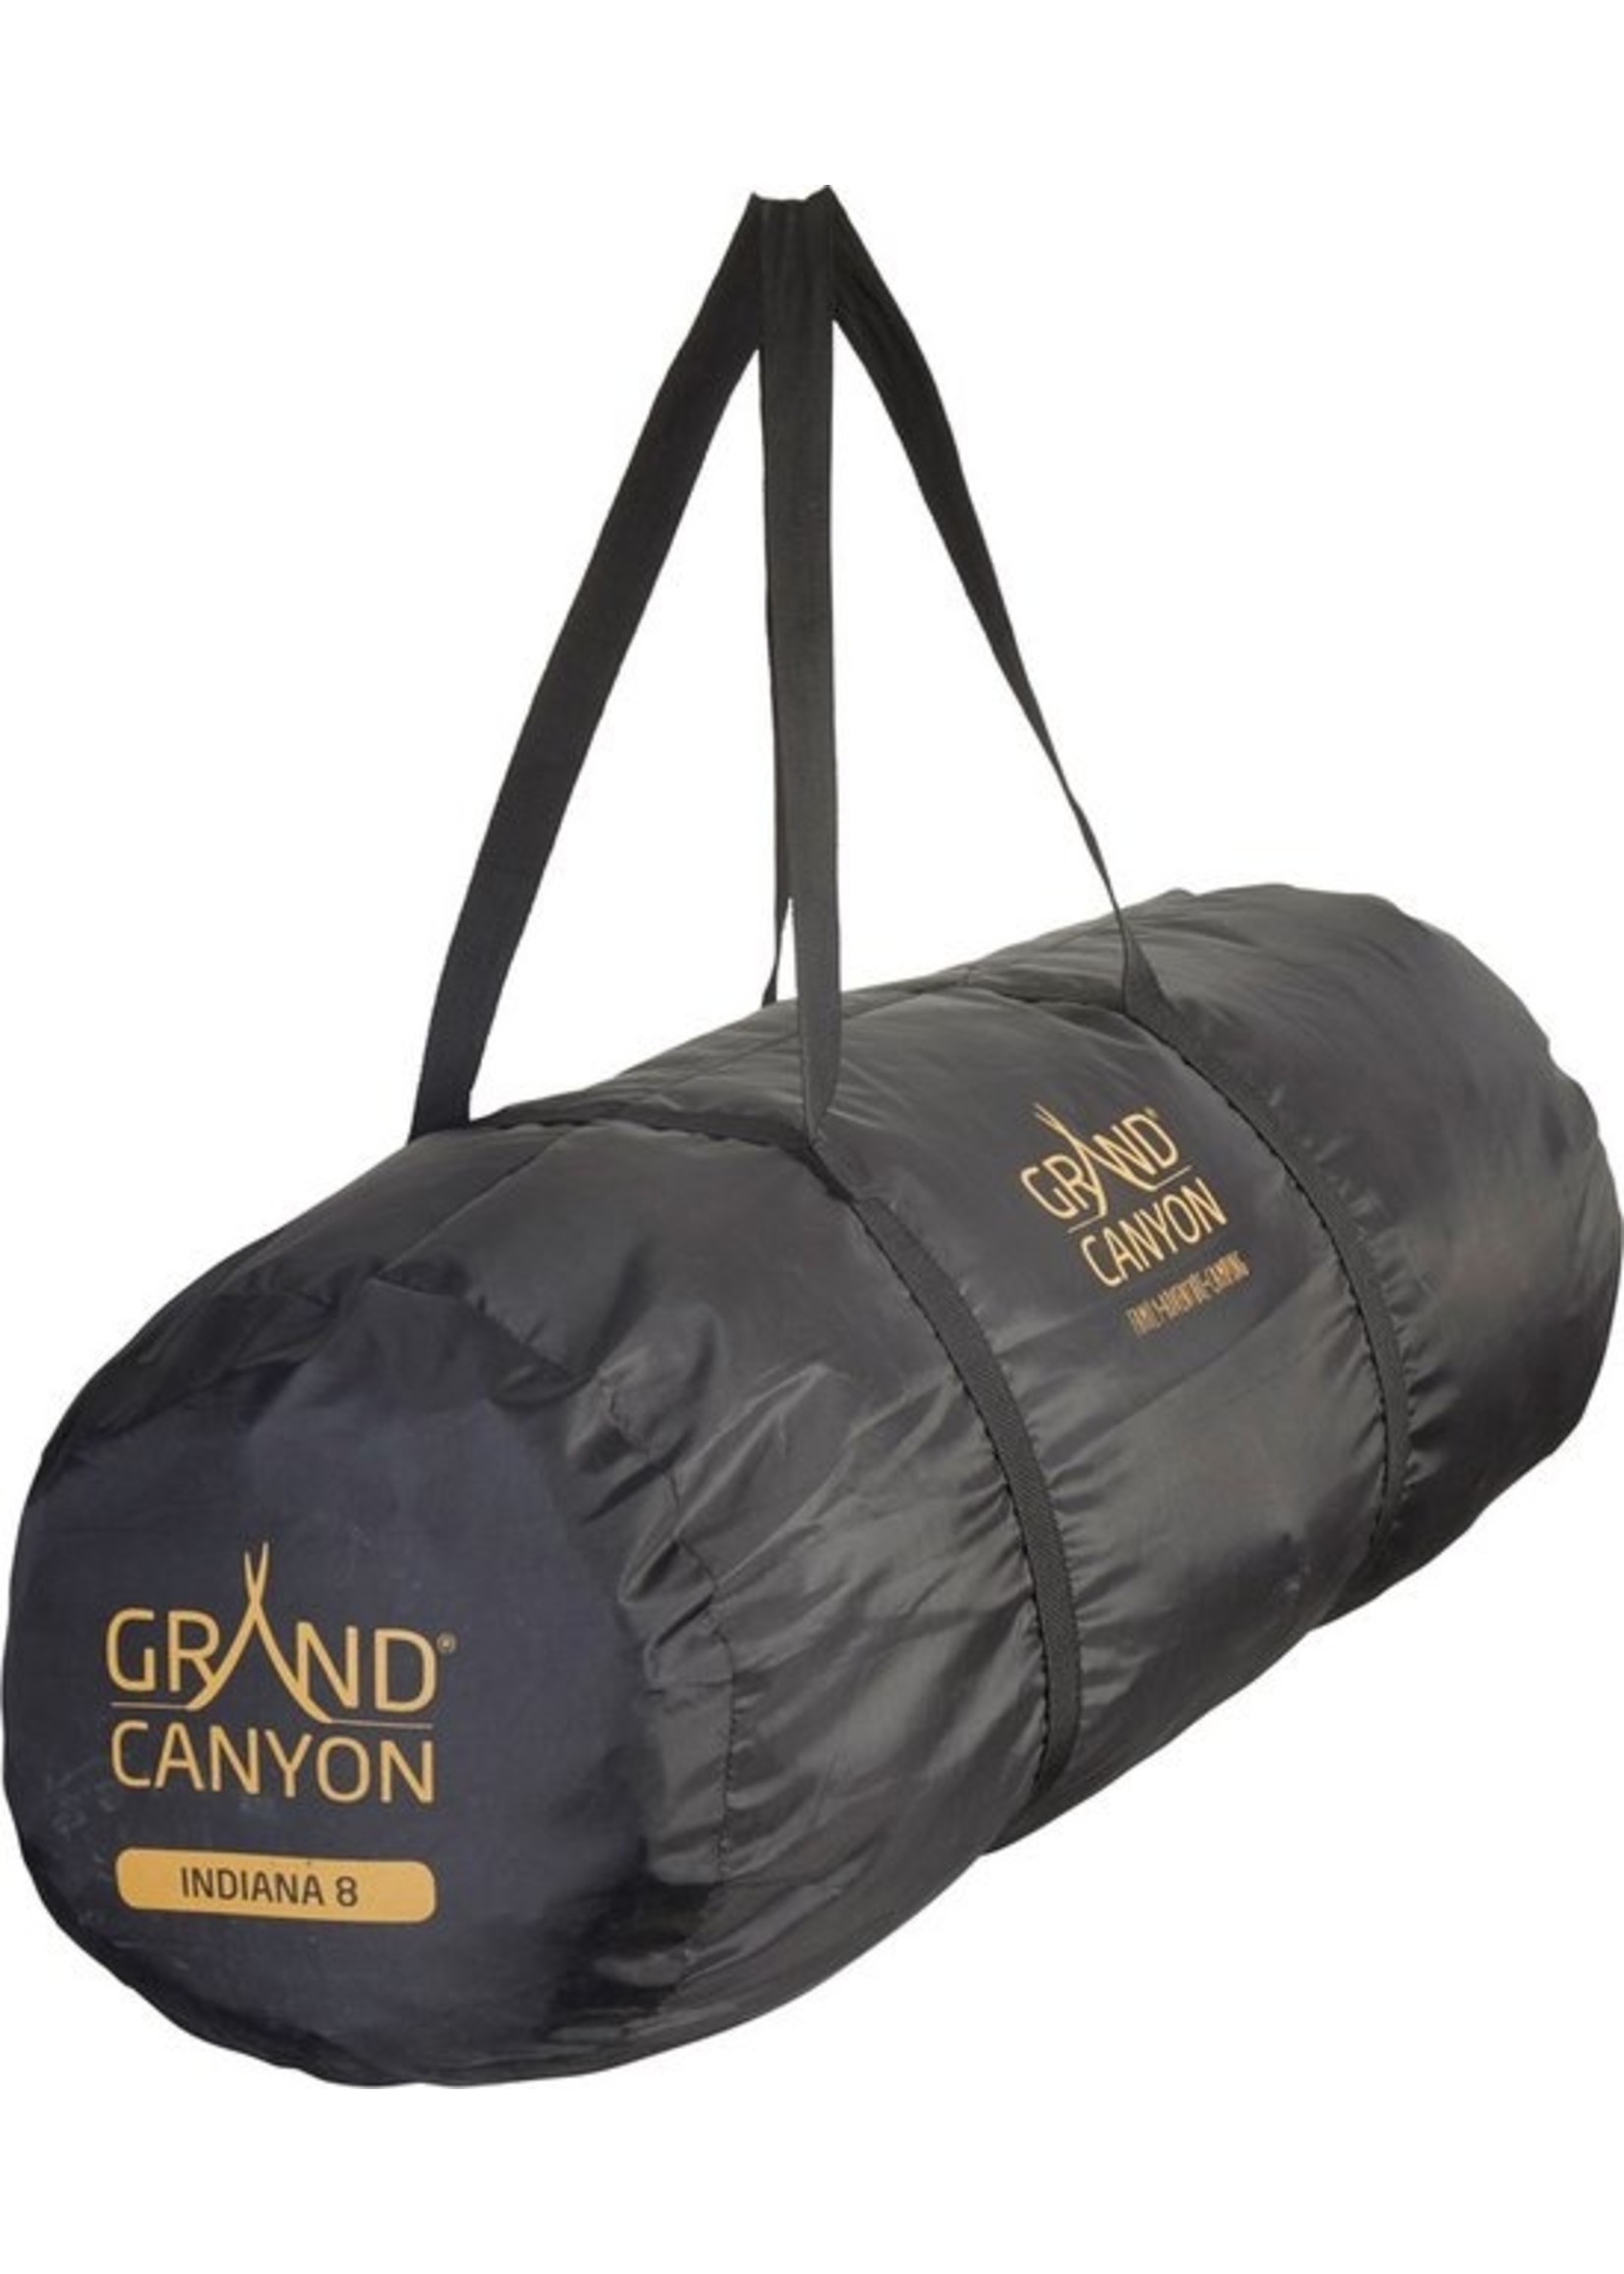 Grand Canyon Grand Canyon Indiana 8 Bell Tent Capulet Olive GROEN